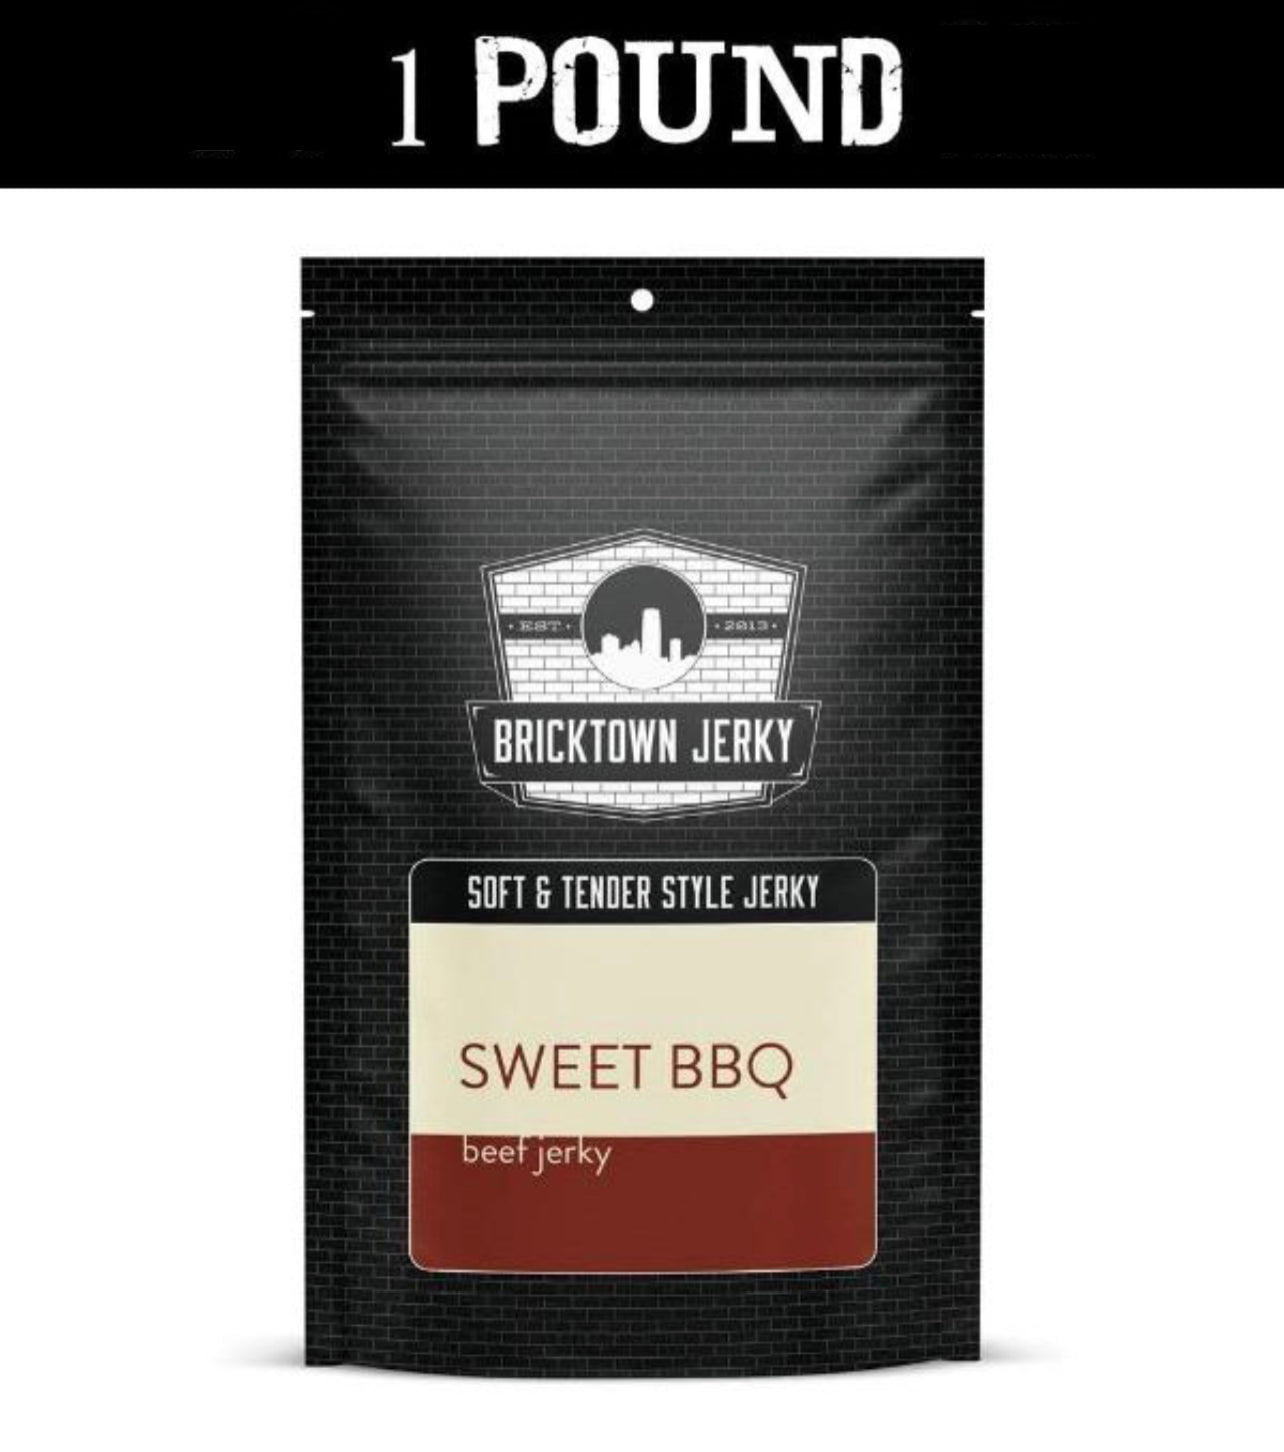 Soft and Tender Style Beef Jerky - Sweet BBQ - 1 Pound by Bricktown Jerky